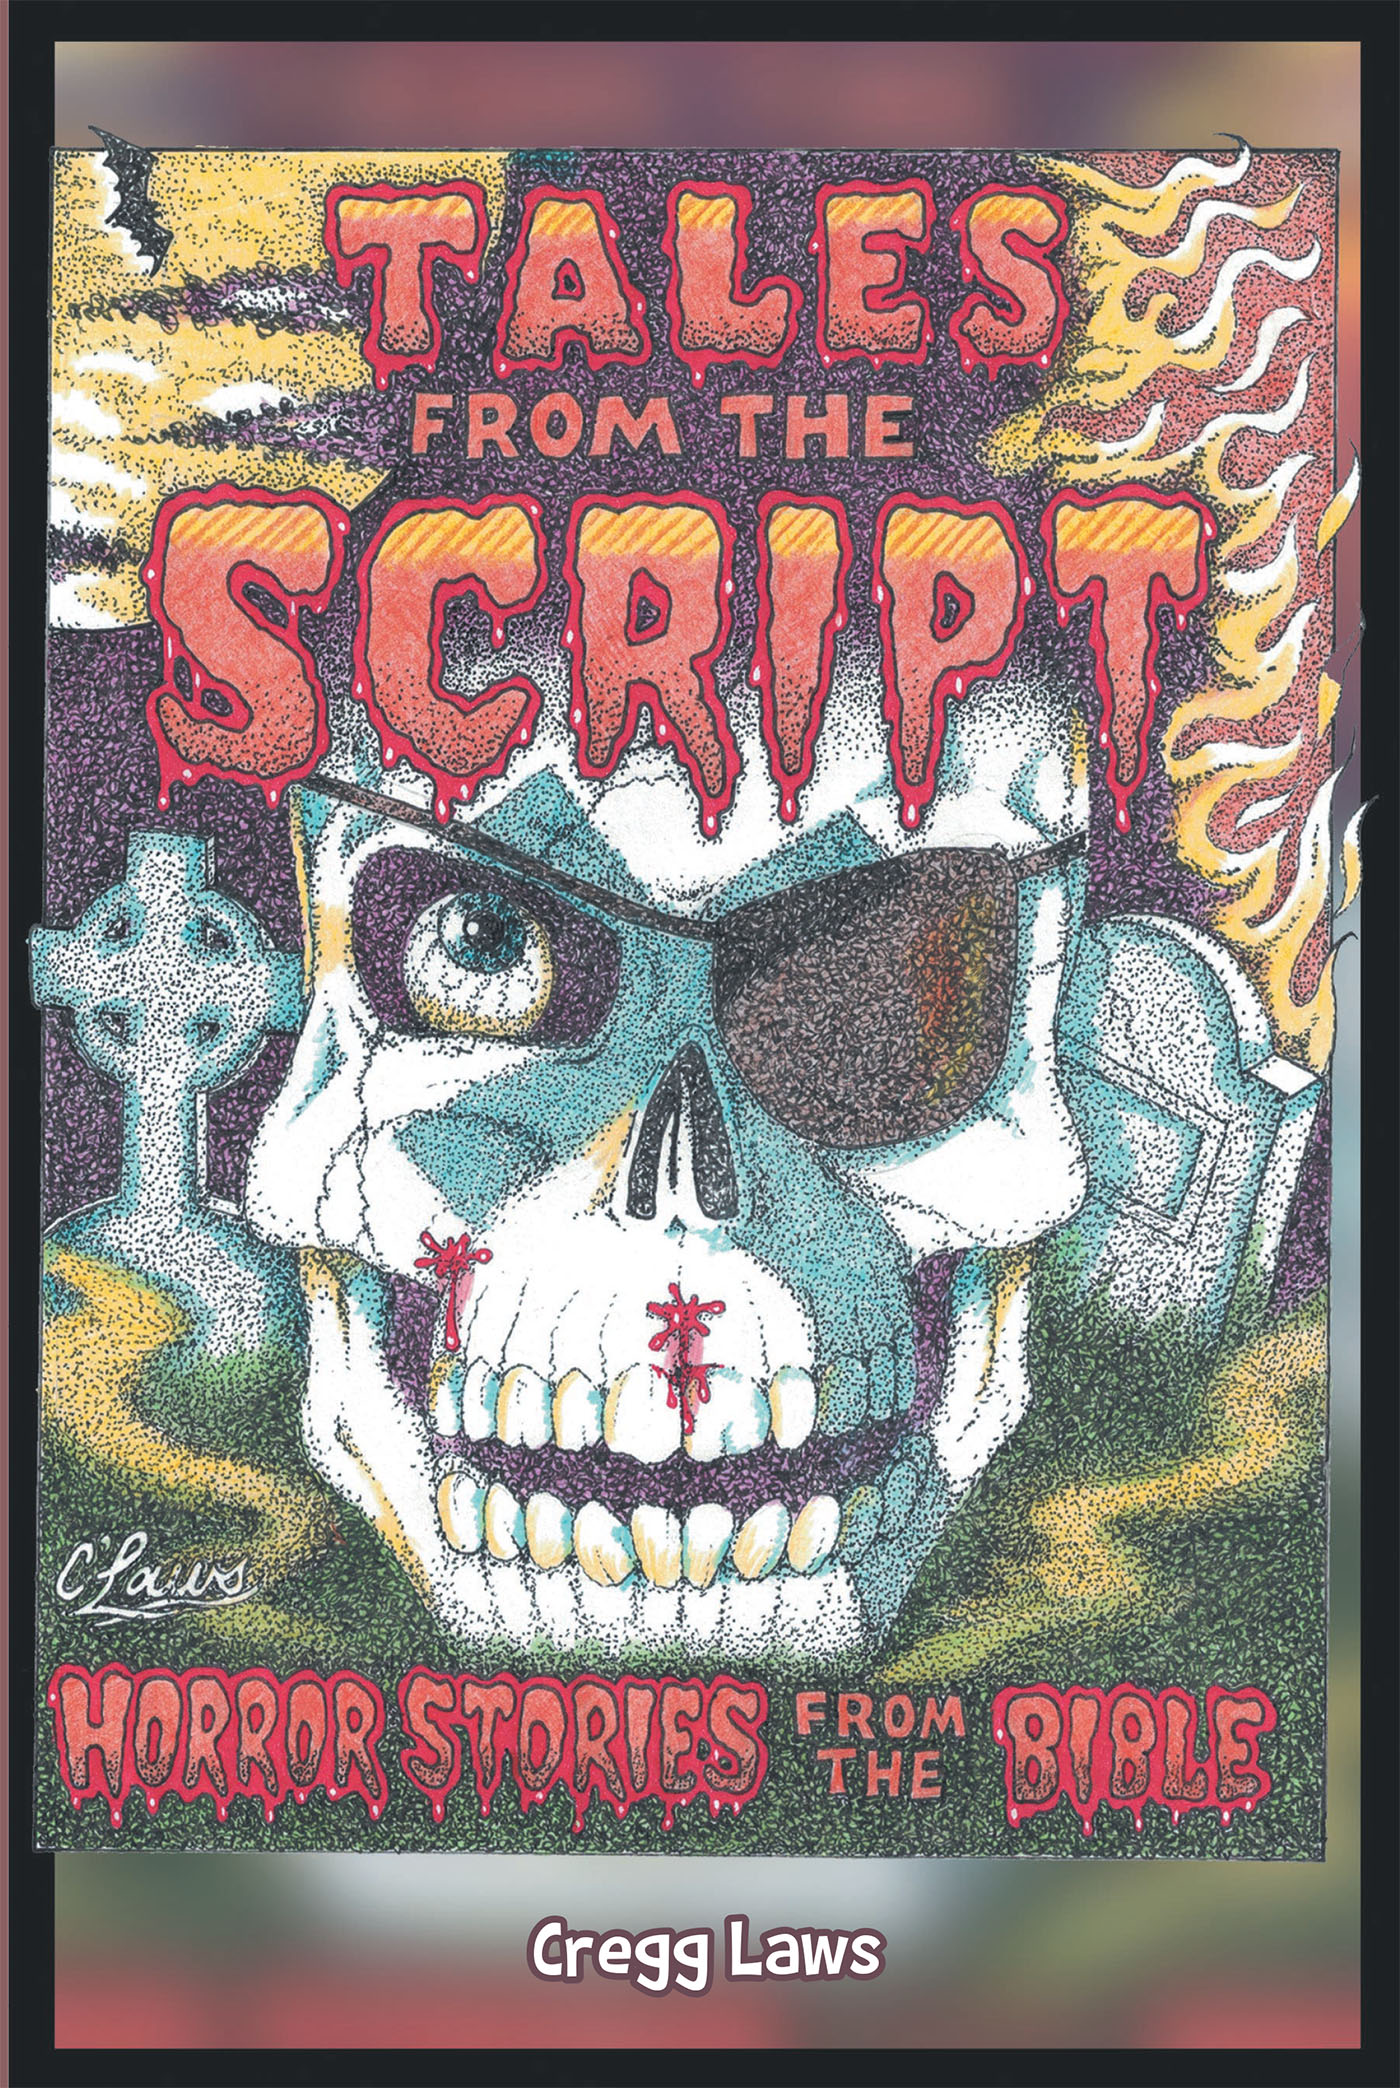 Cregg Laws’s New Book "Tales from the Script: Horror Stories from the Bible" is a Gripping Take on Bible Stories That Sets Out to Encourage Teens to Engage with His Word